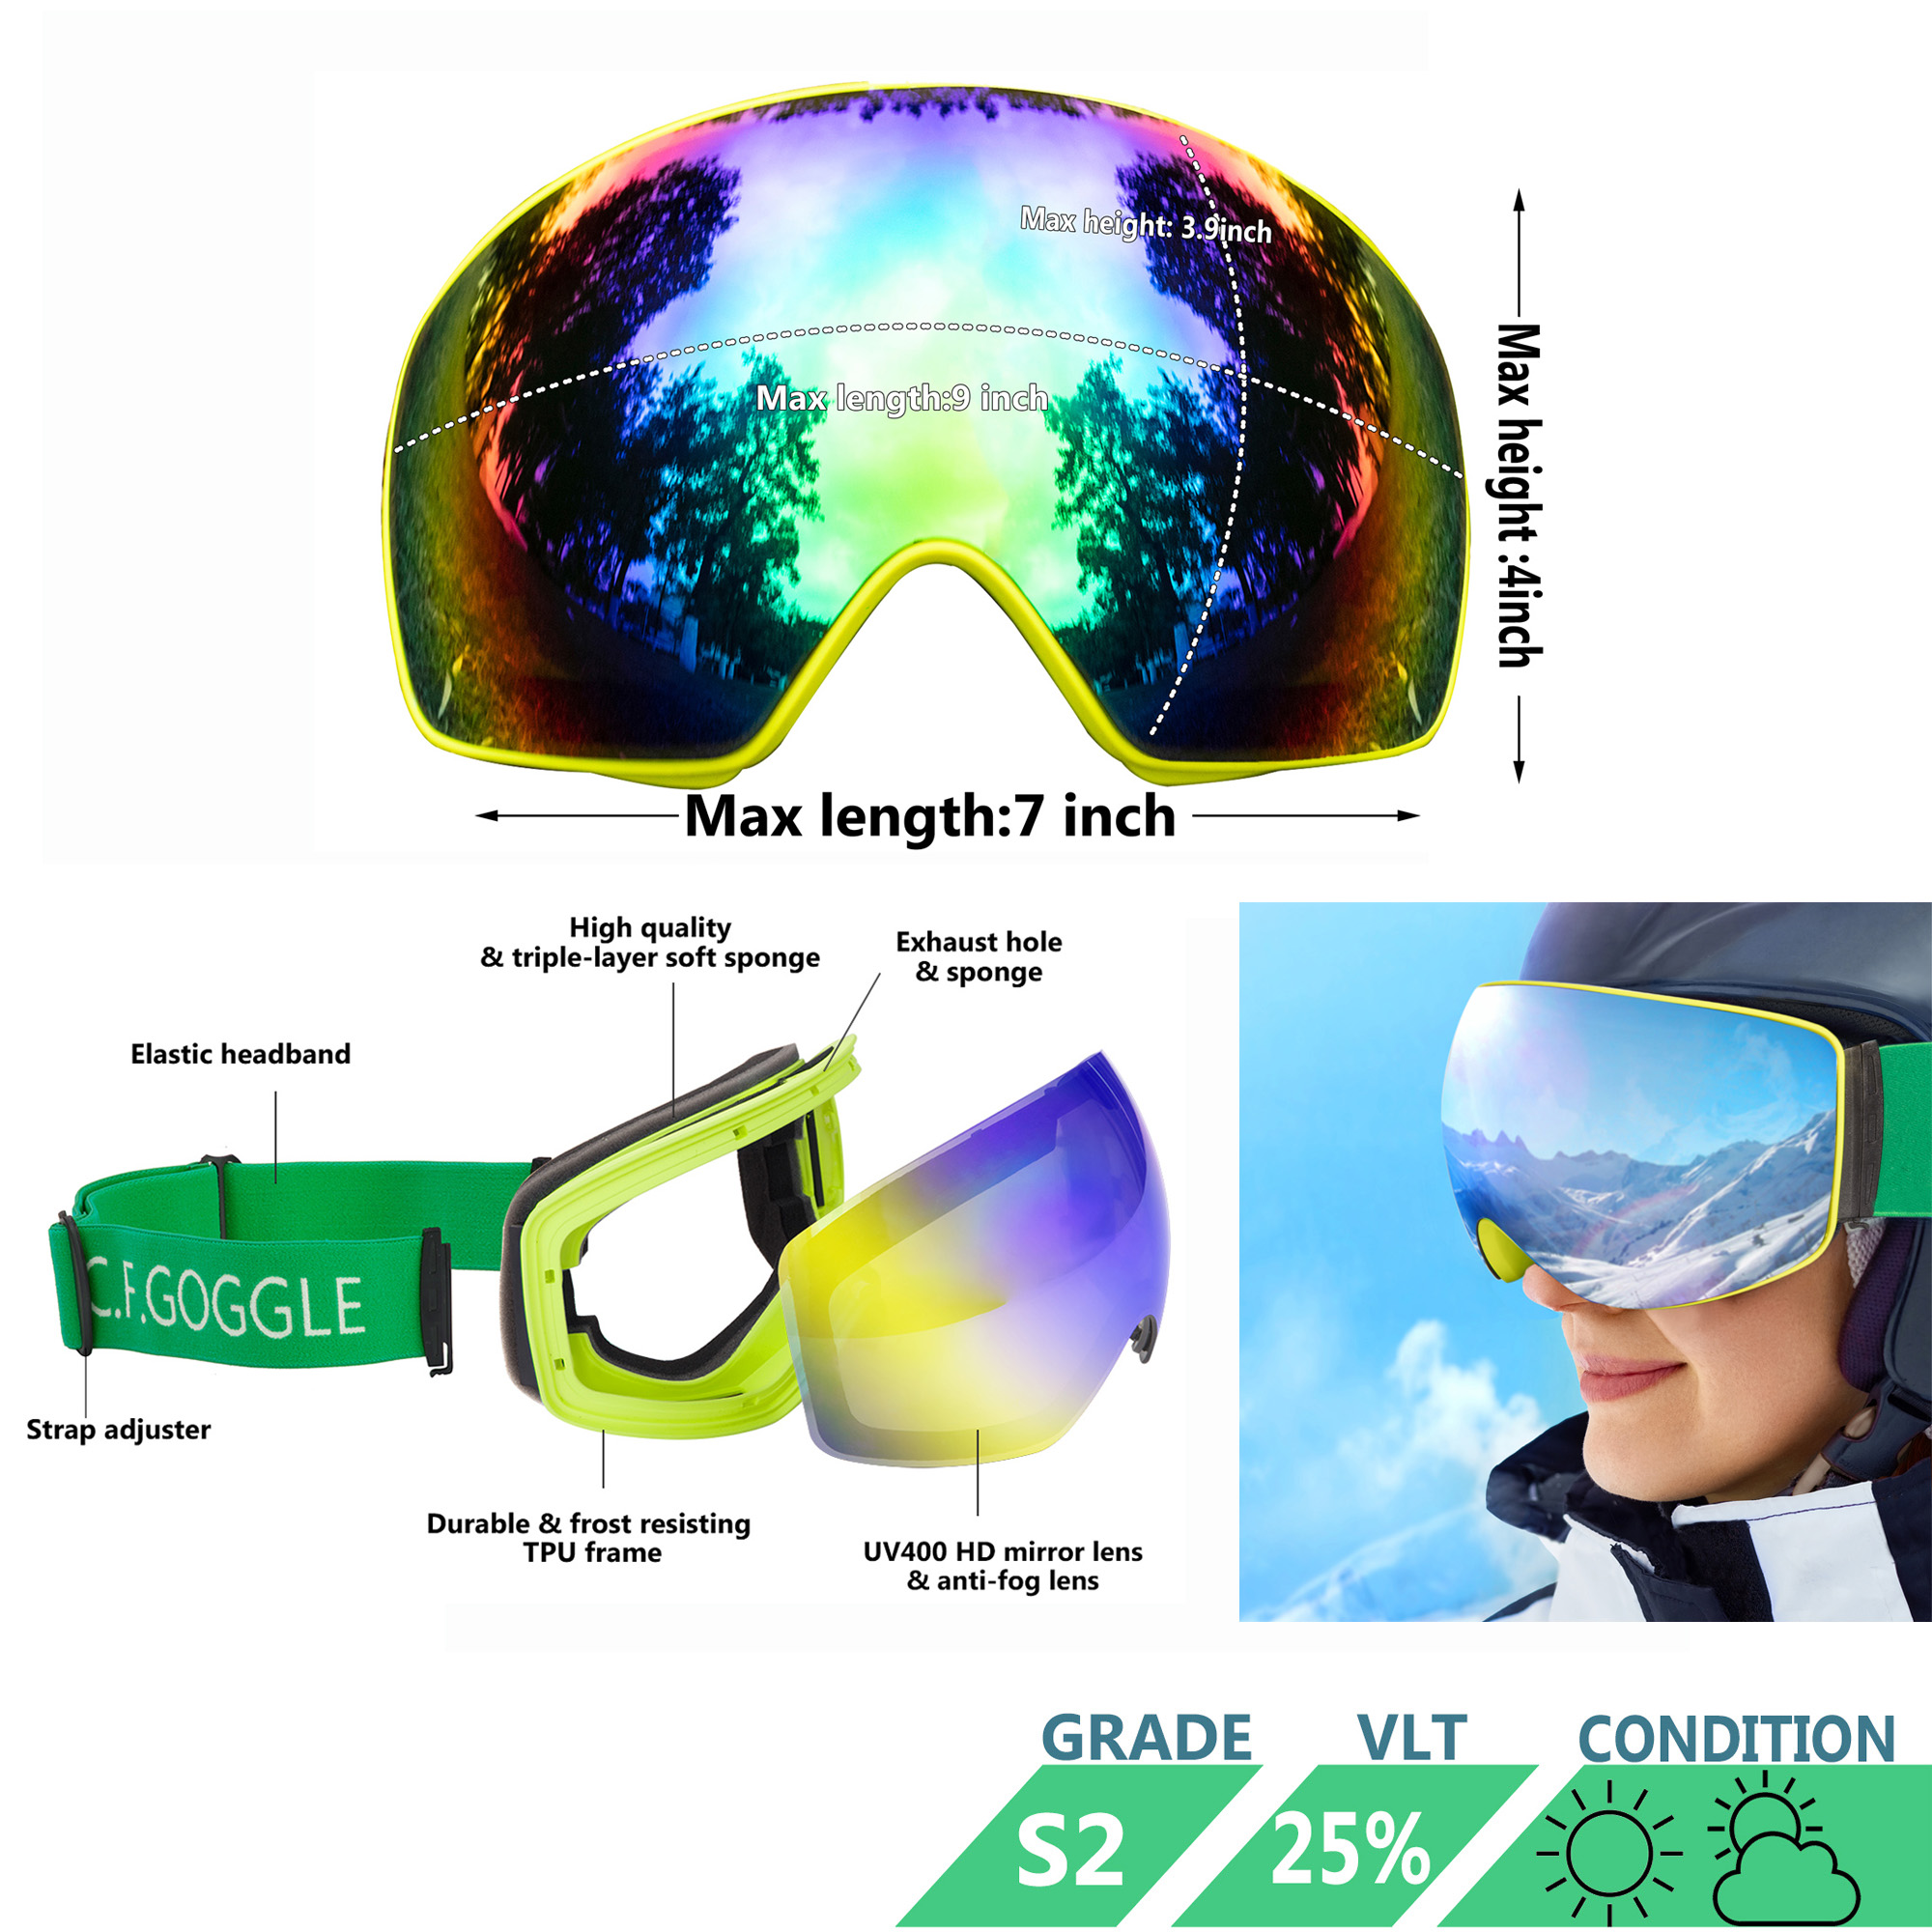 LELINTA Womens Skis, Snowboards & Accessories Goggles, for Skiing, Snowboarding, Motorcycling and Winter Sports - Anti-Fog and Helmet Compatible - OTG UV400 Protection - image 4 of 8